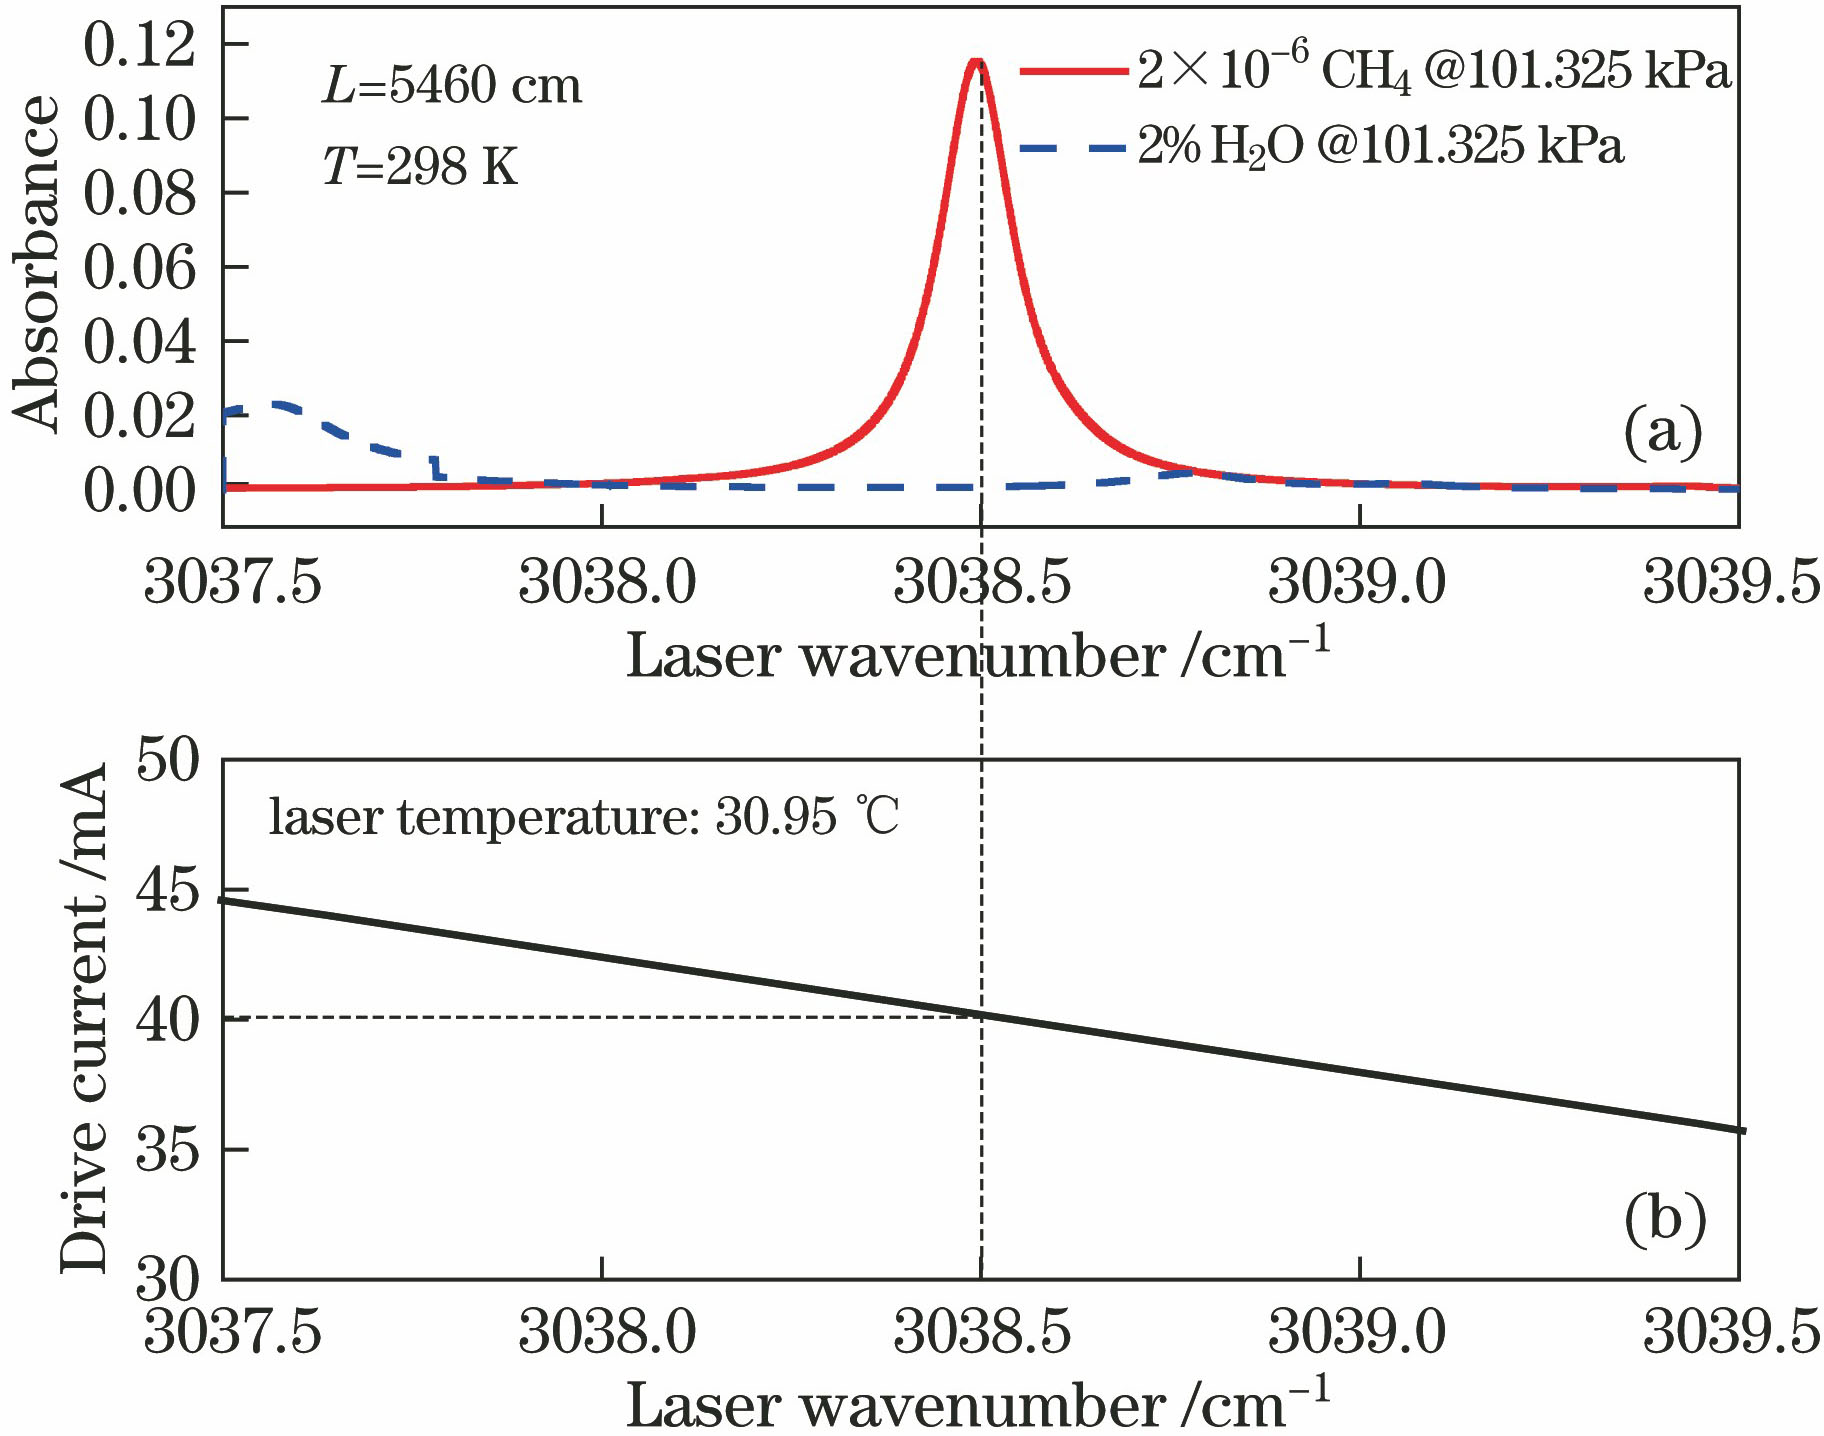 (a) Absorption spectra of CH4 and H2O; (b) relationship between the emission wavenumber of laser and the drive current at the working temperature of 30.95 ℃